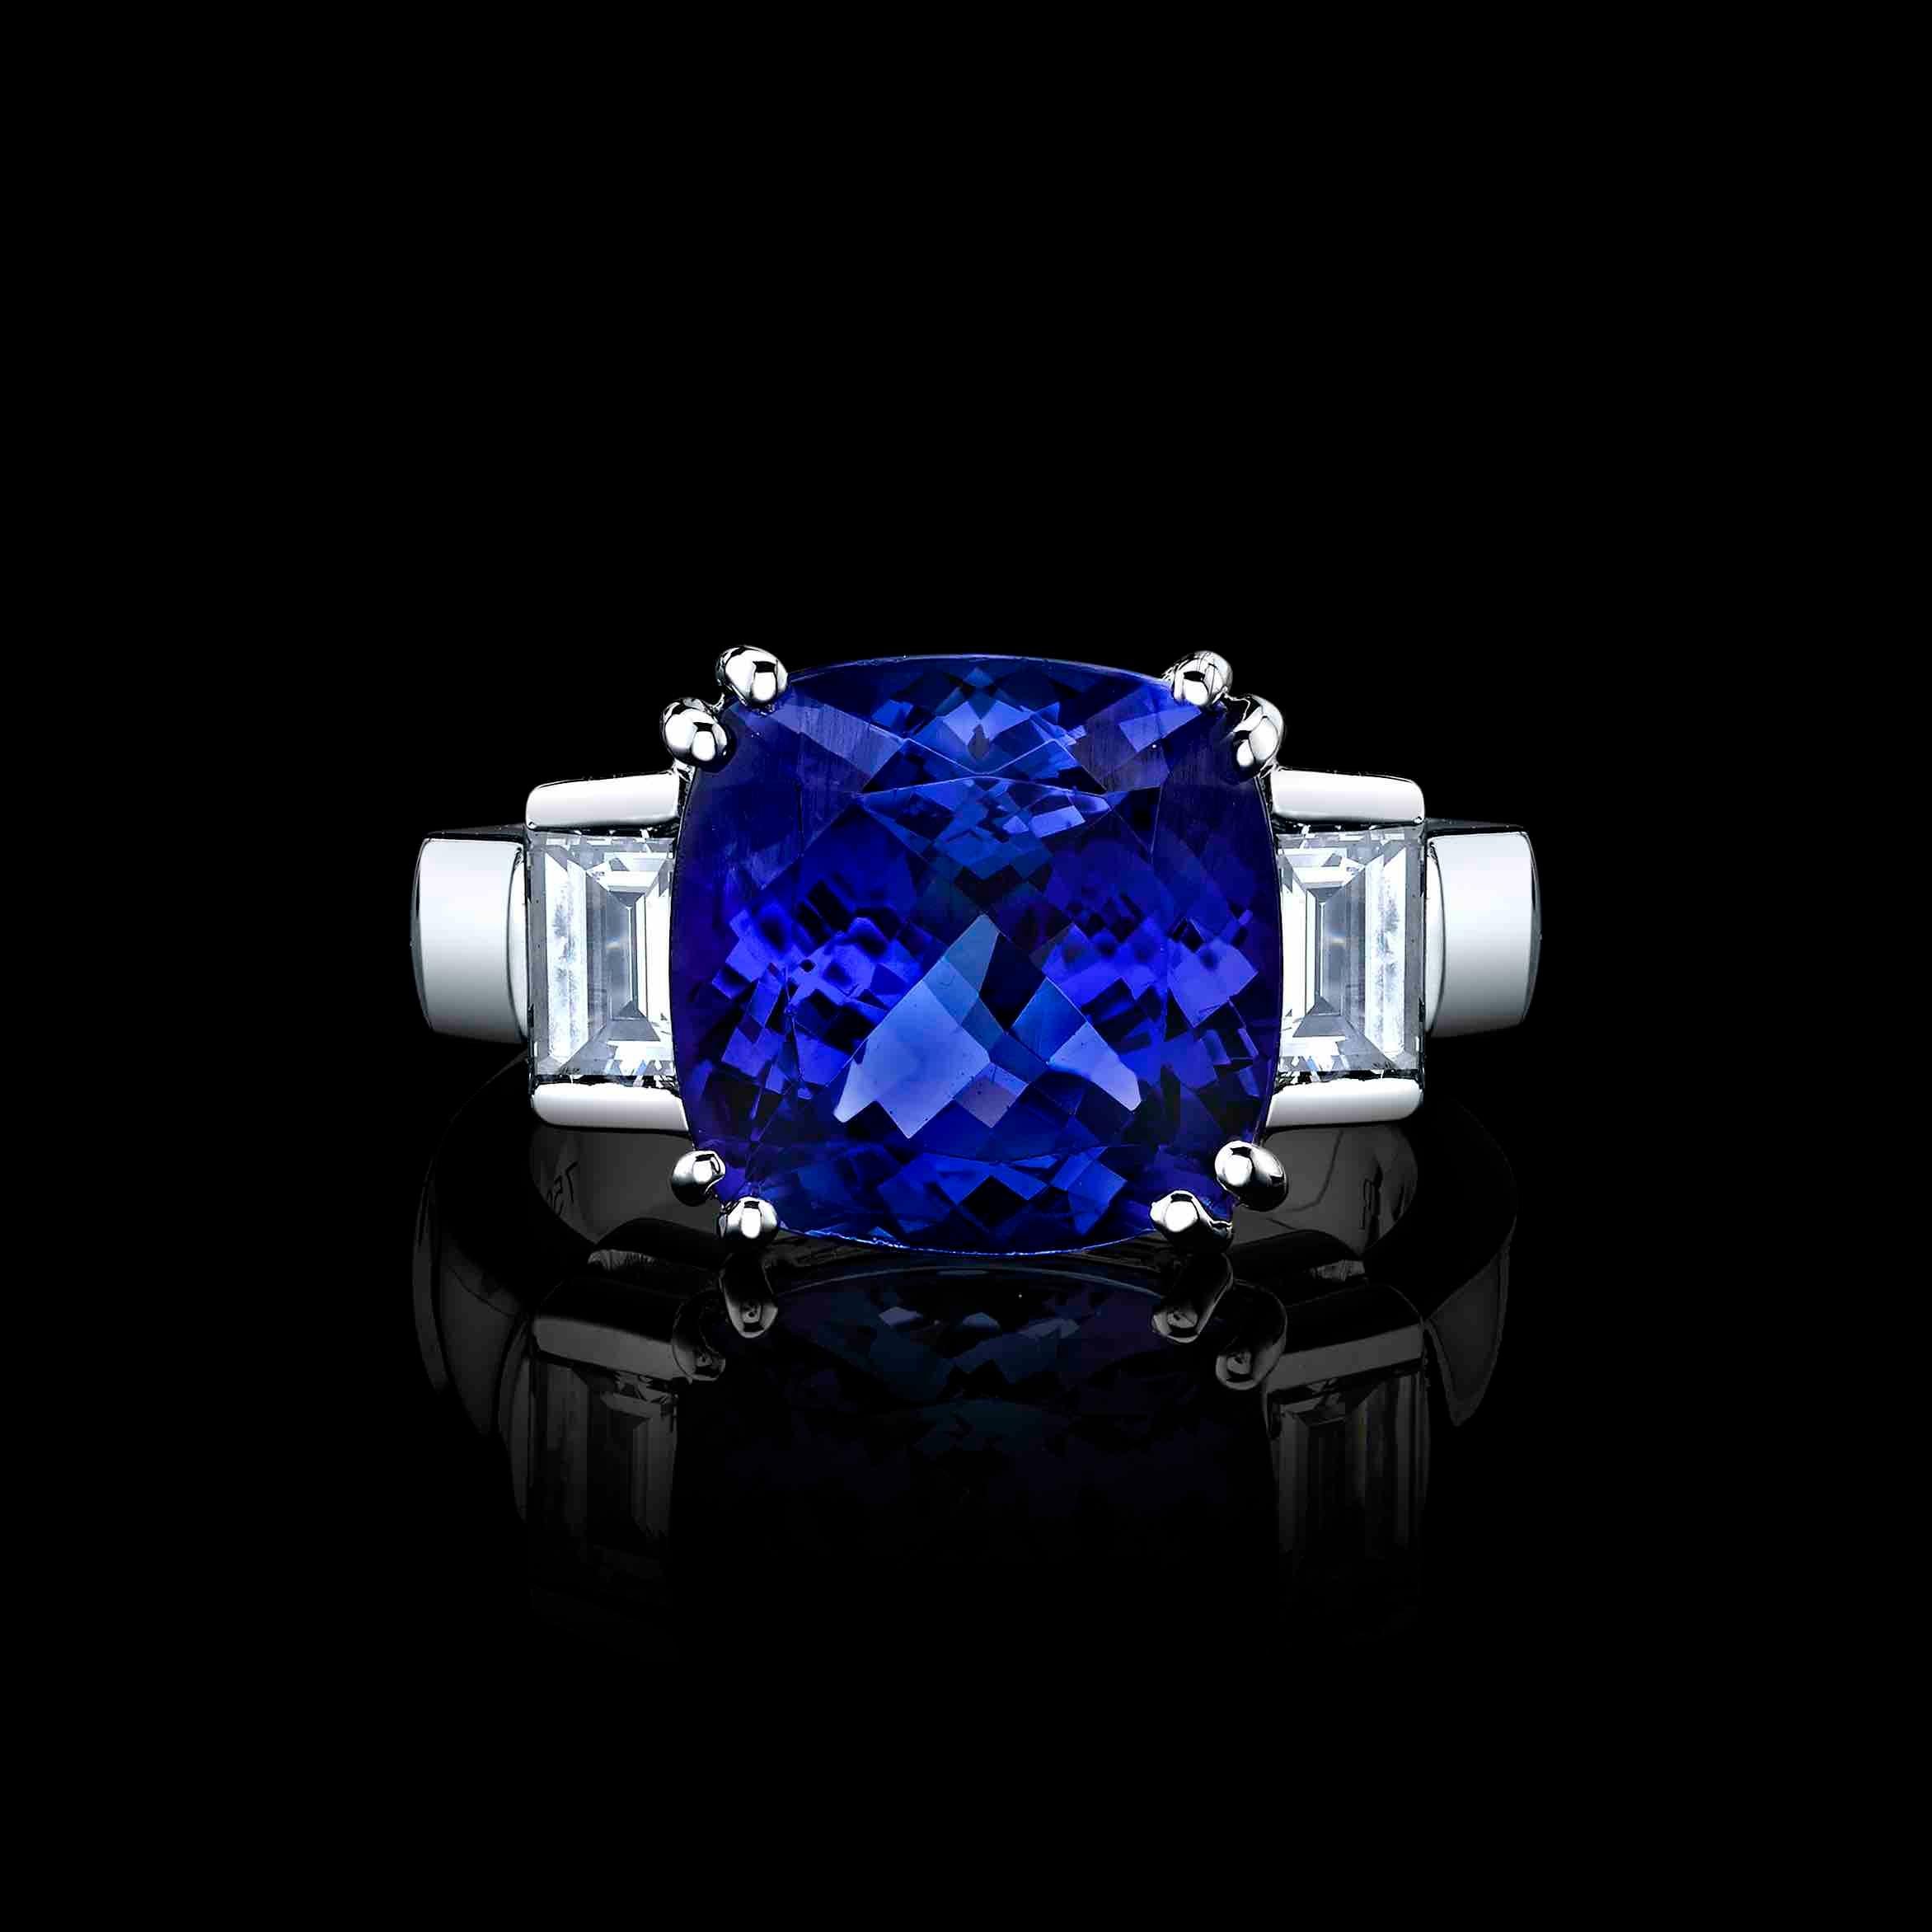 A beautiful 6.47ct Cushion Tanzanite set in 18K white gold ring with 2 side Diamond baguettes with a total weight of 1.02cttw